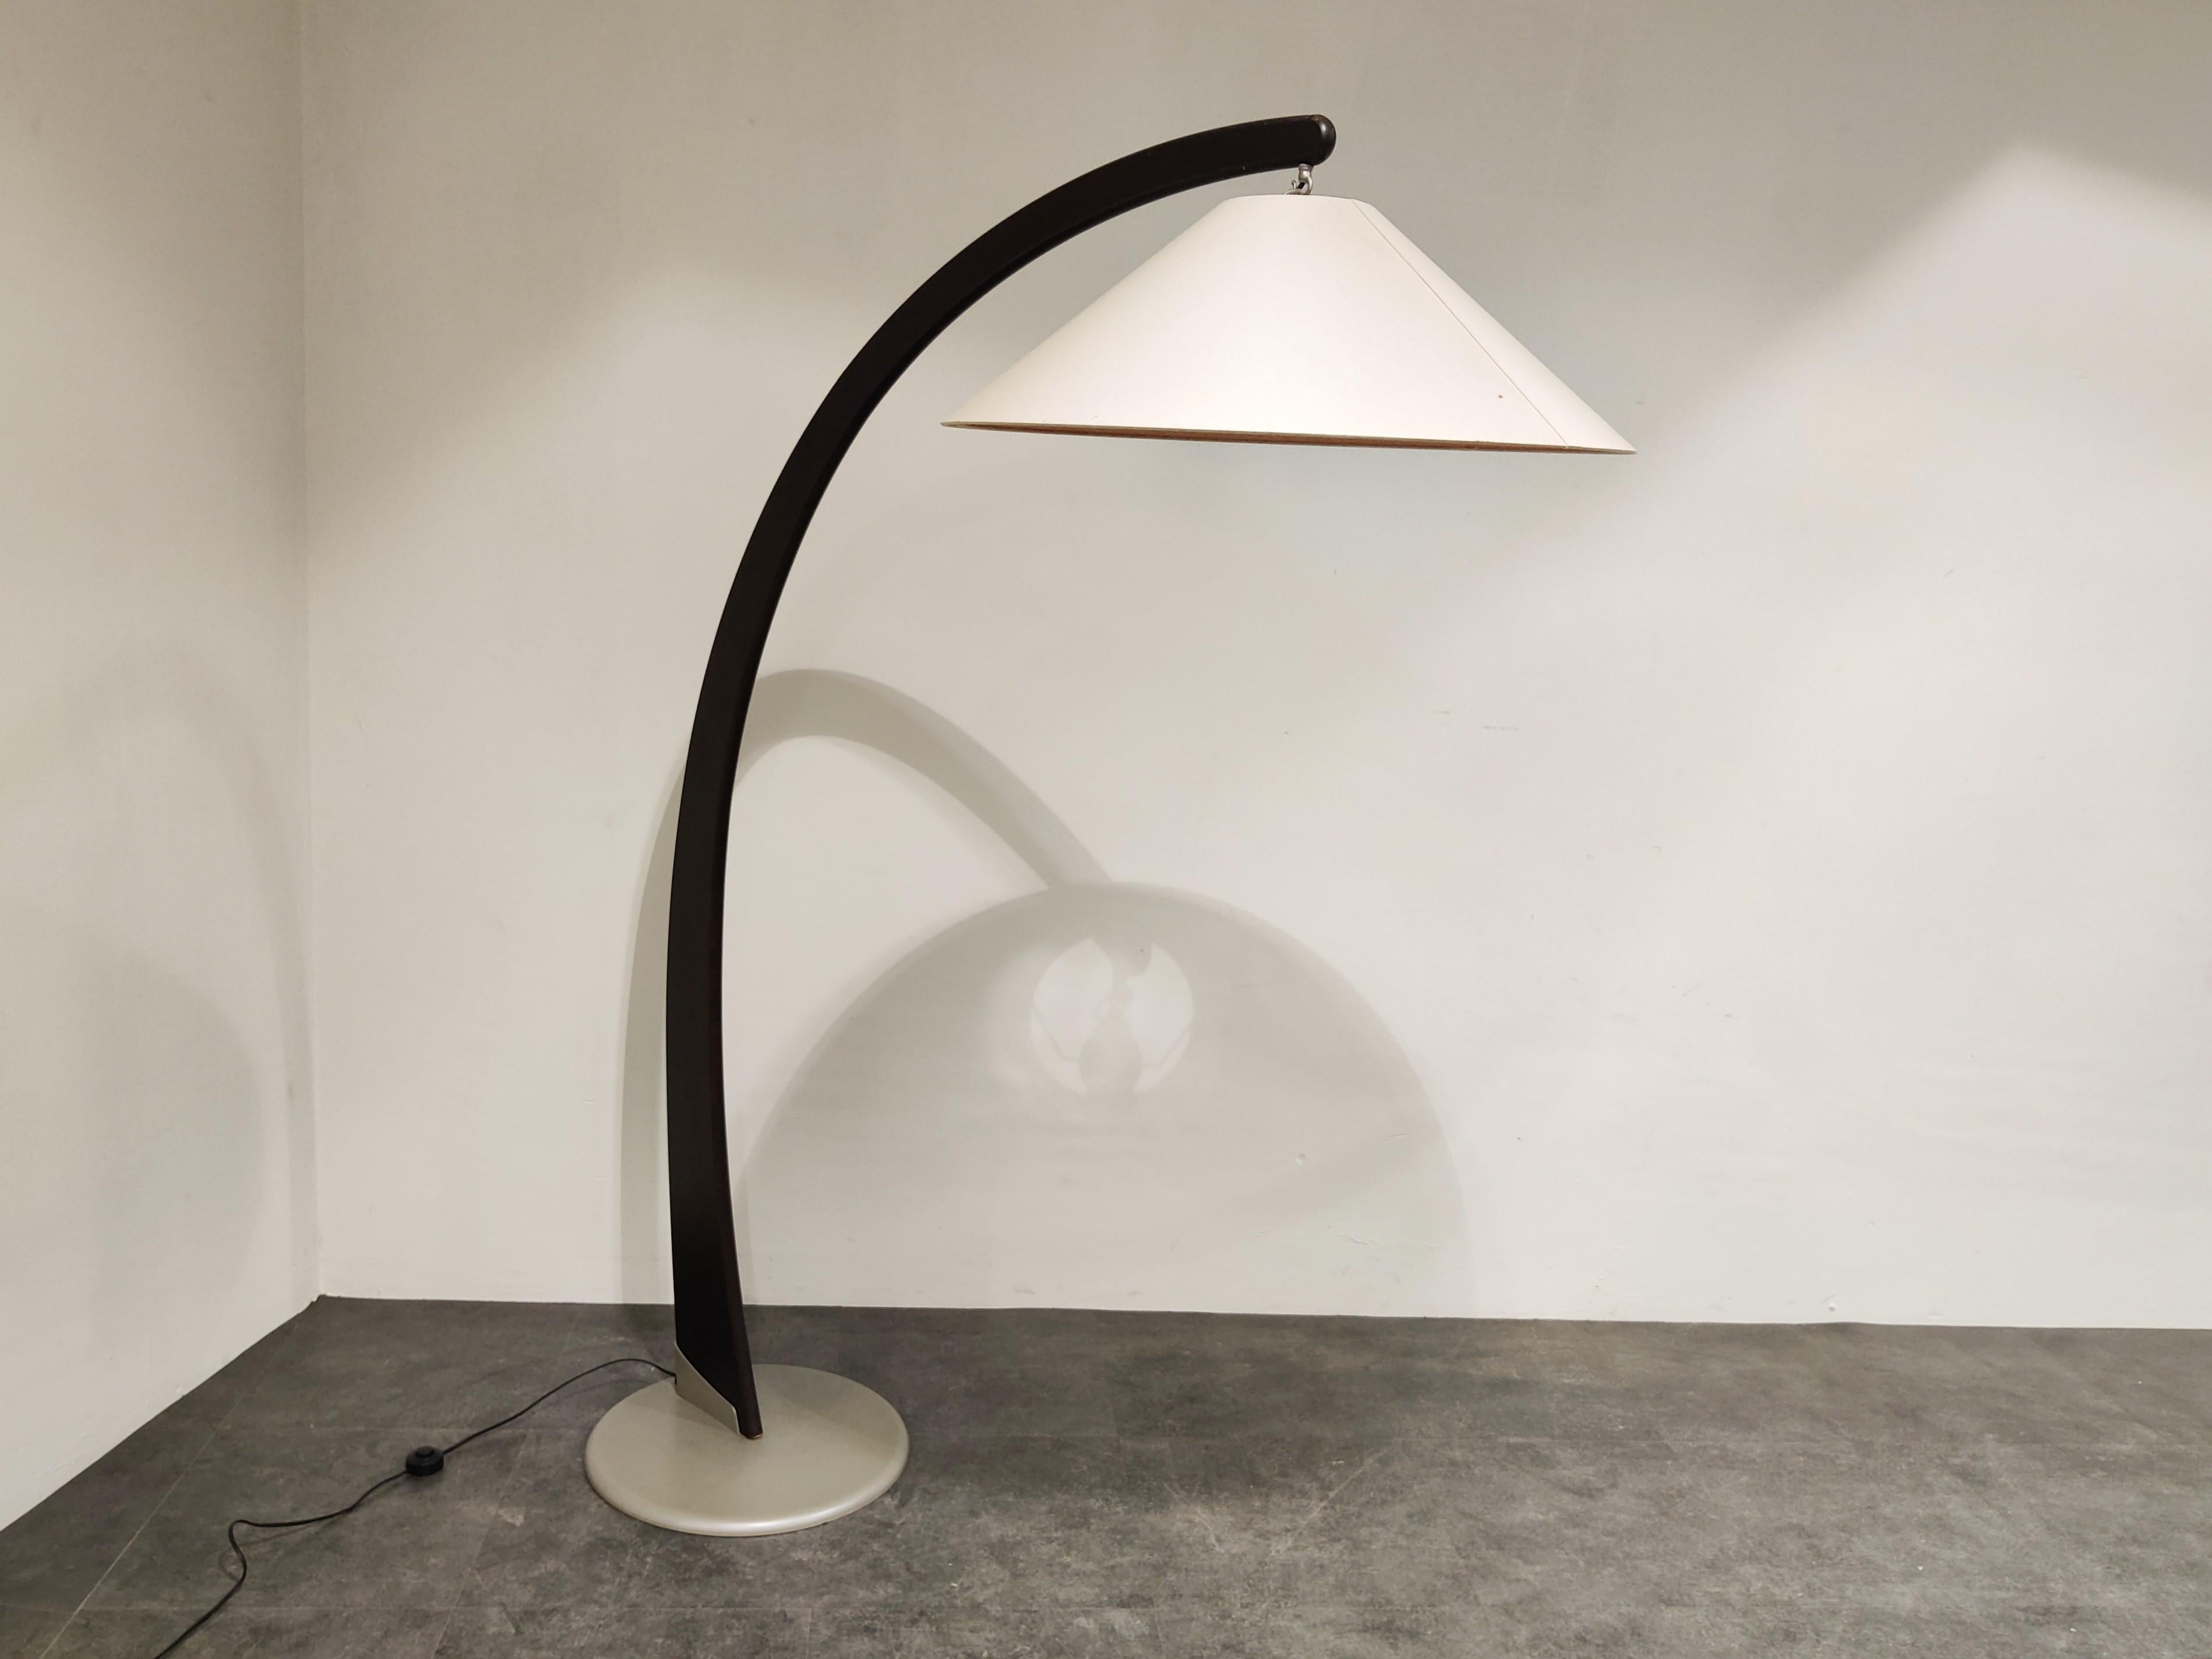 Early 1990s 'Luna' floor lamp by Natuzzi.

This rather large floor light has a beautiful elegant look thanks to it's fantastically shaped wooden arm.

Contrasting metal base and off-white fabric lamp shade.

Works with a regular E27 light